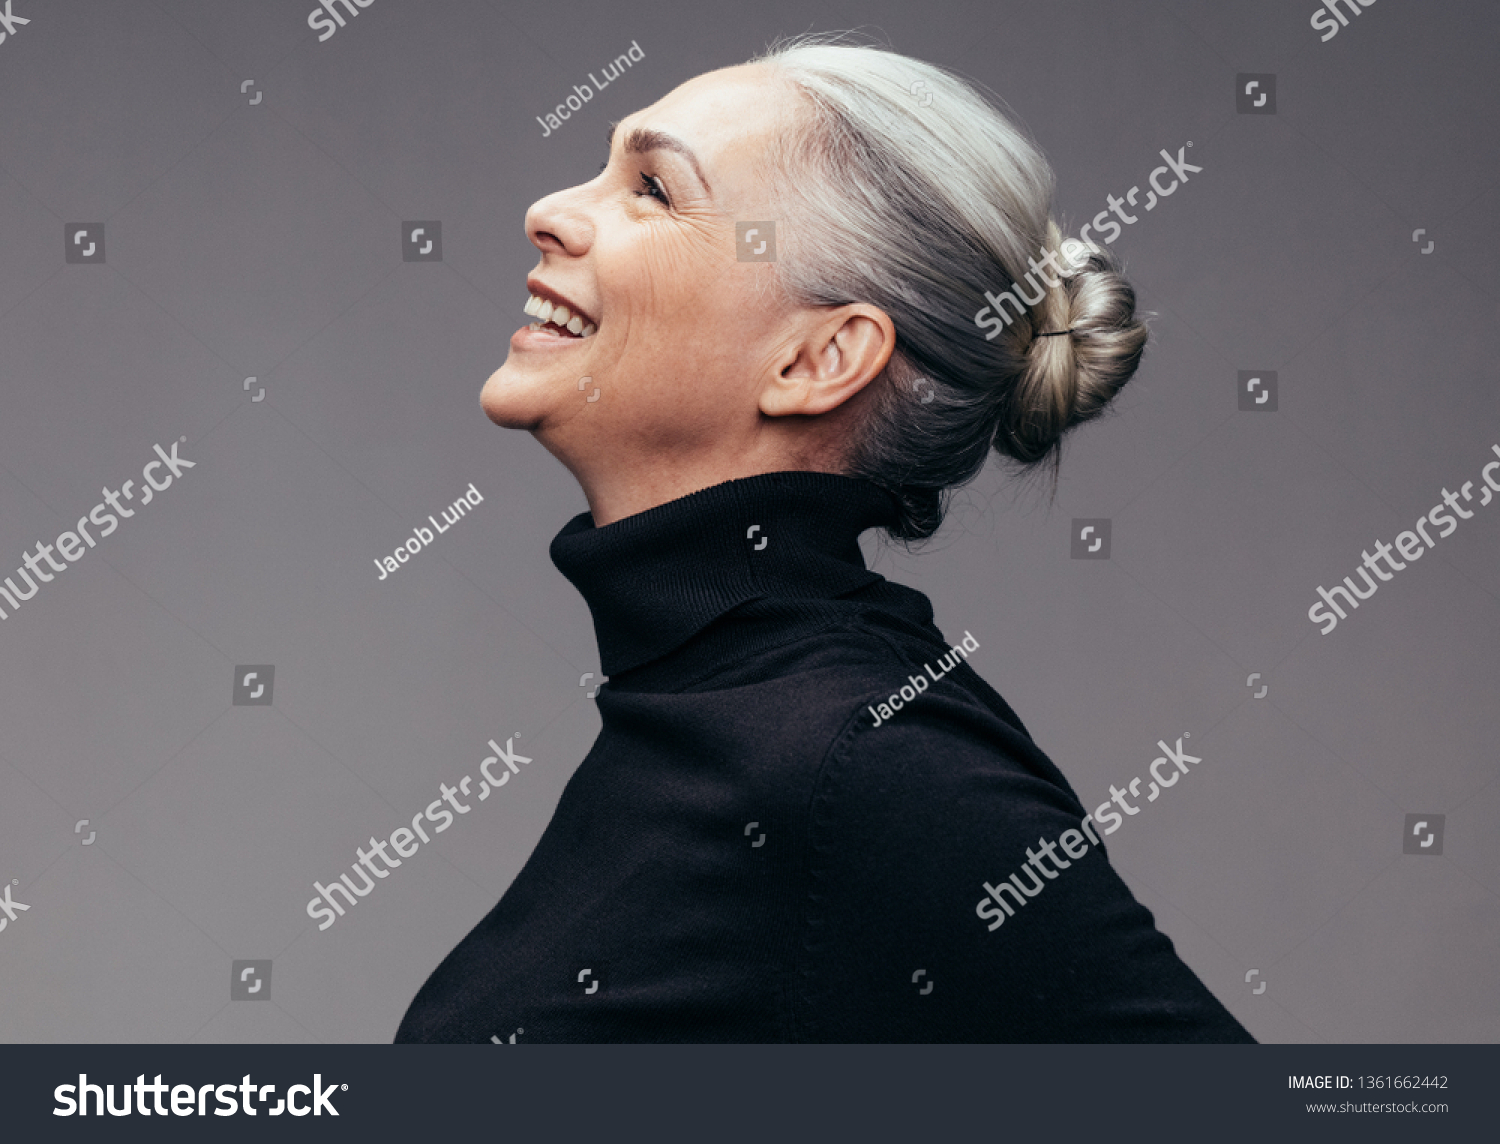 Side view of senior woman laughing on gray background. Profile view of mature woman in black casuals looking happy #1361662442